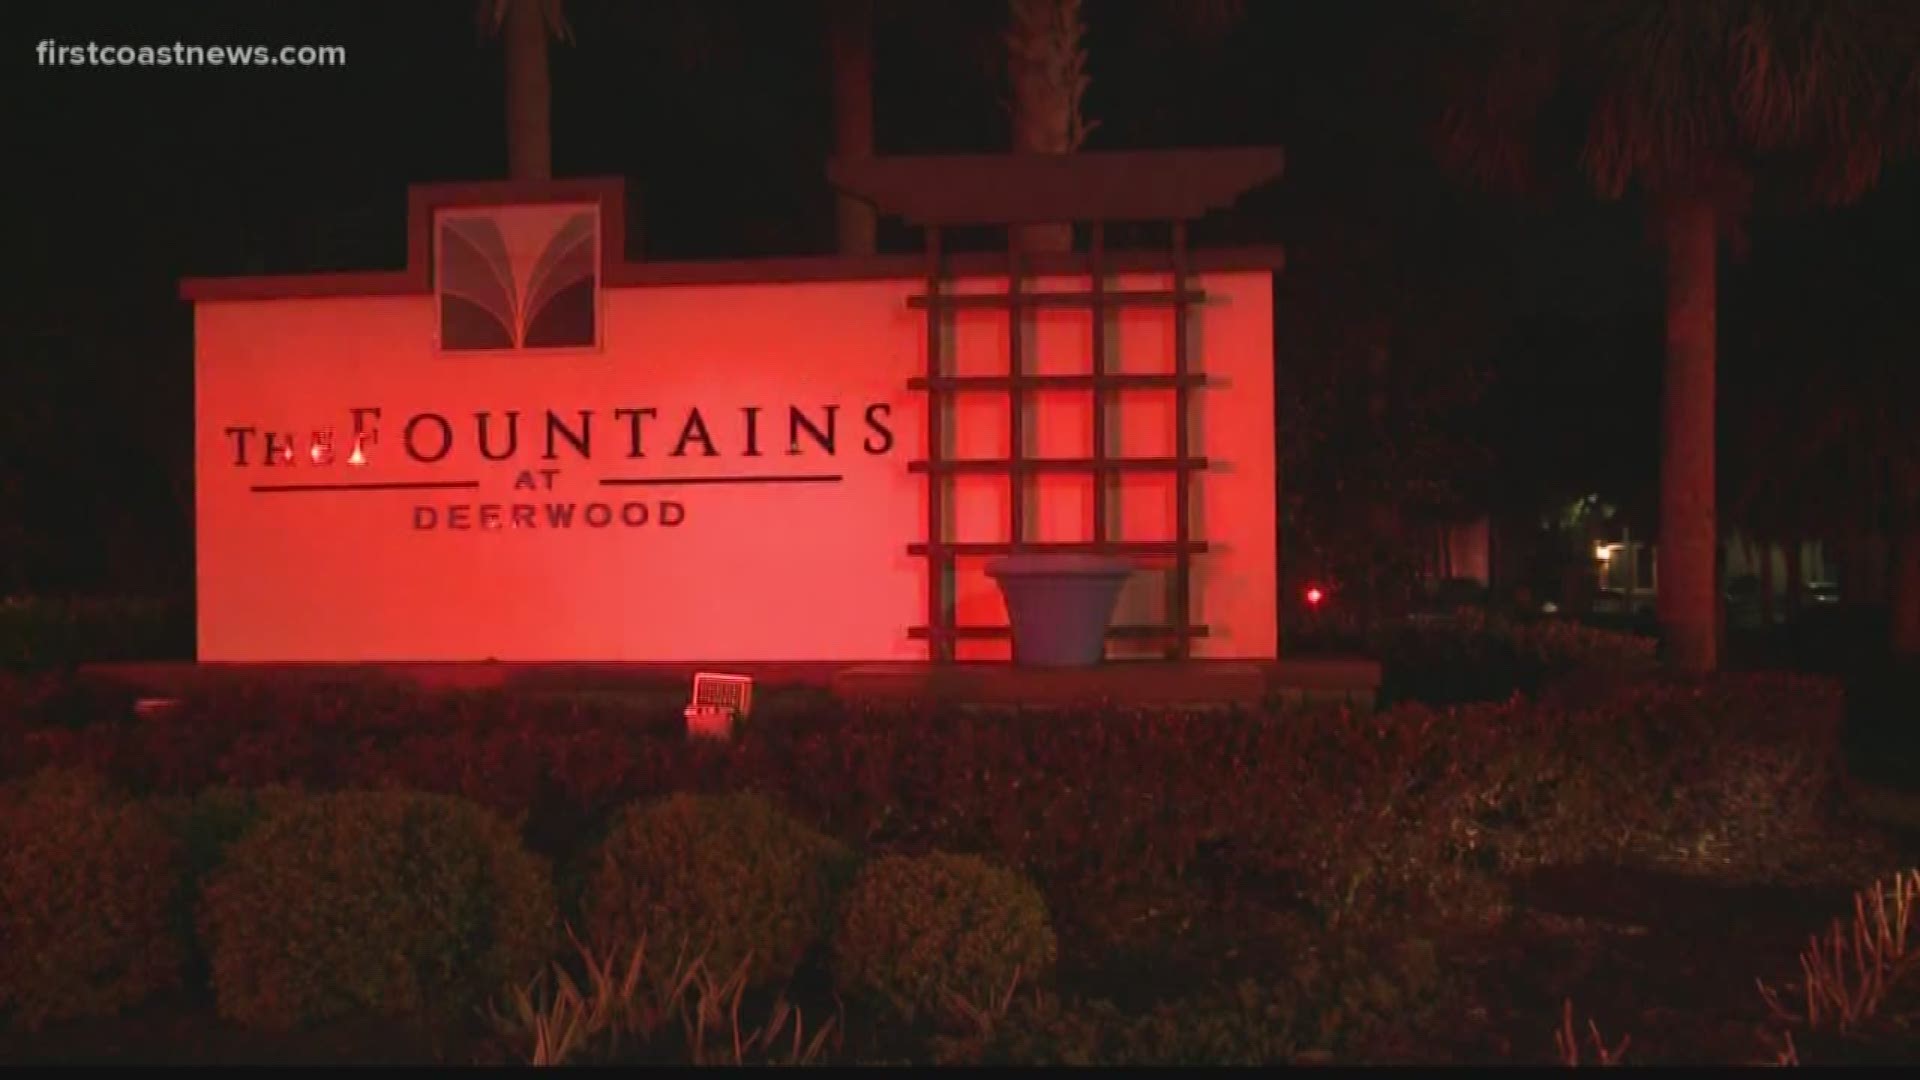 A fire broke out at the Fountains at Deerwood apartment complex. FCN's Lana Harris has the latest information.